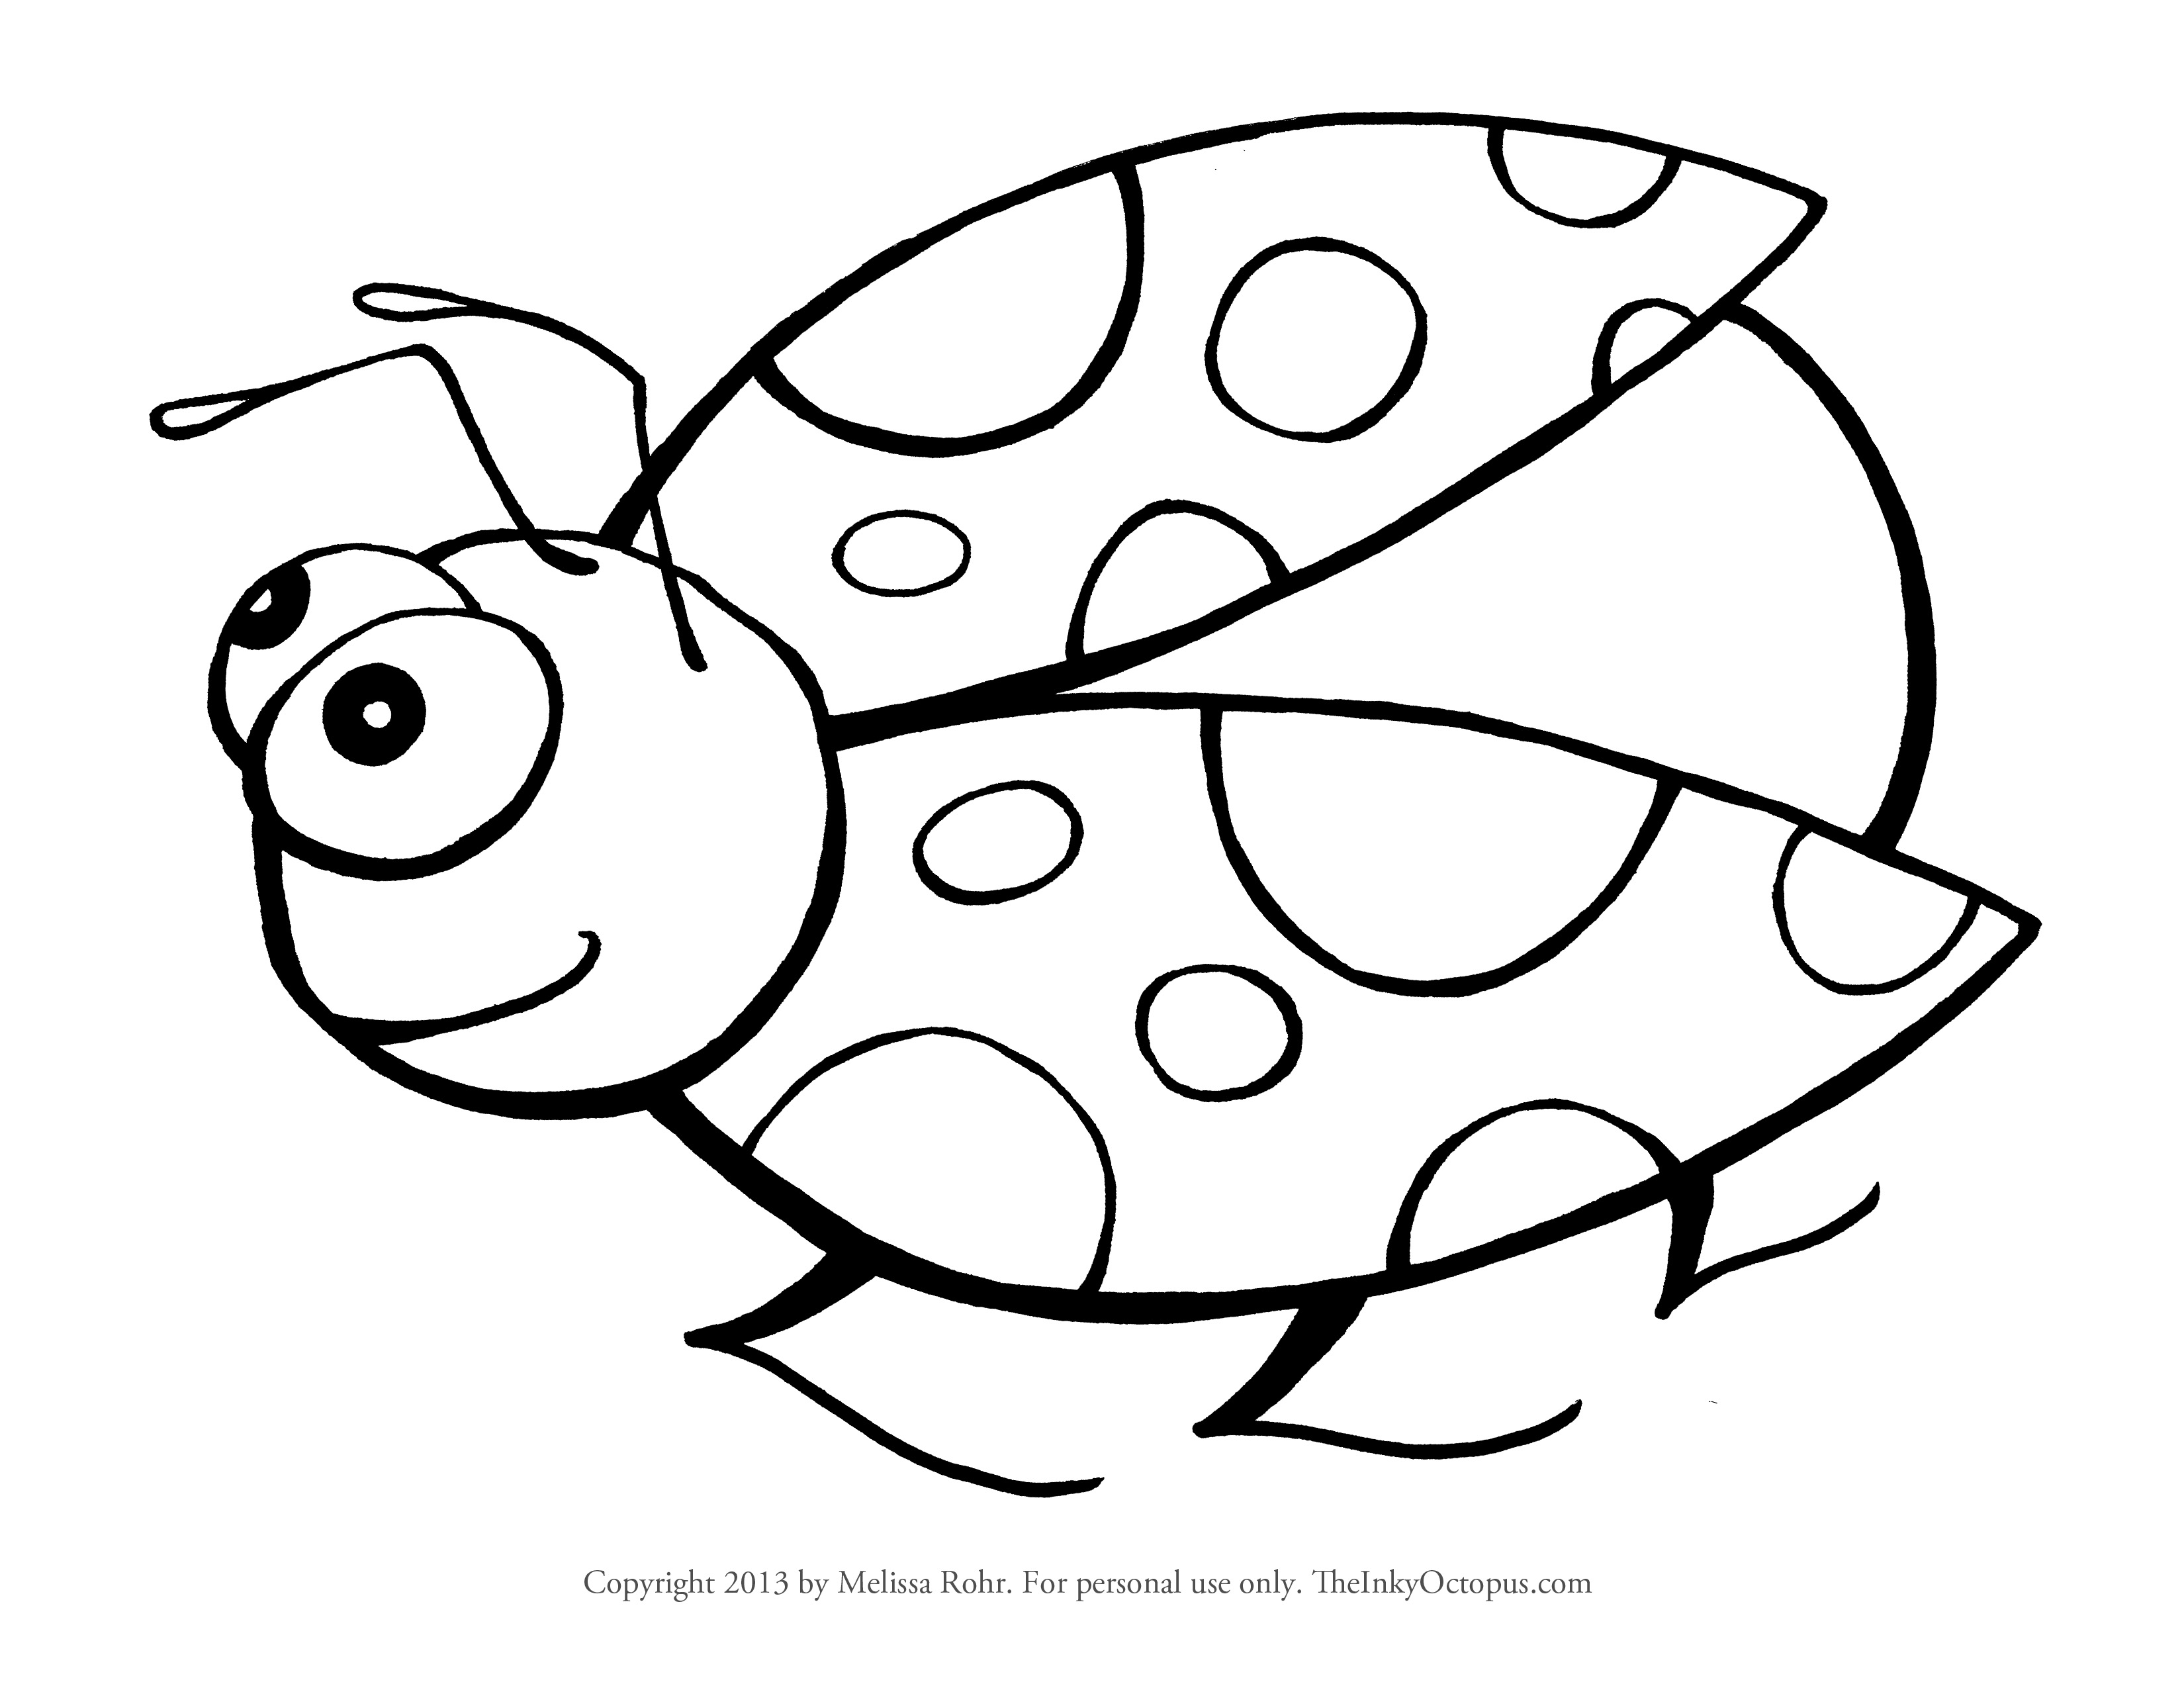 free-bug-outline-download-free-bug-outline-png-images-free-cliparts